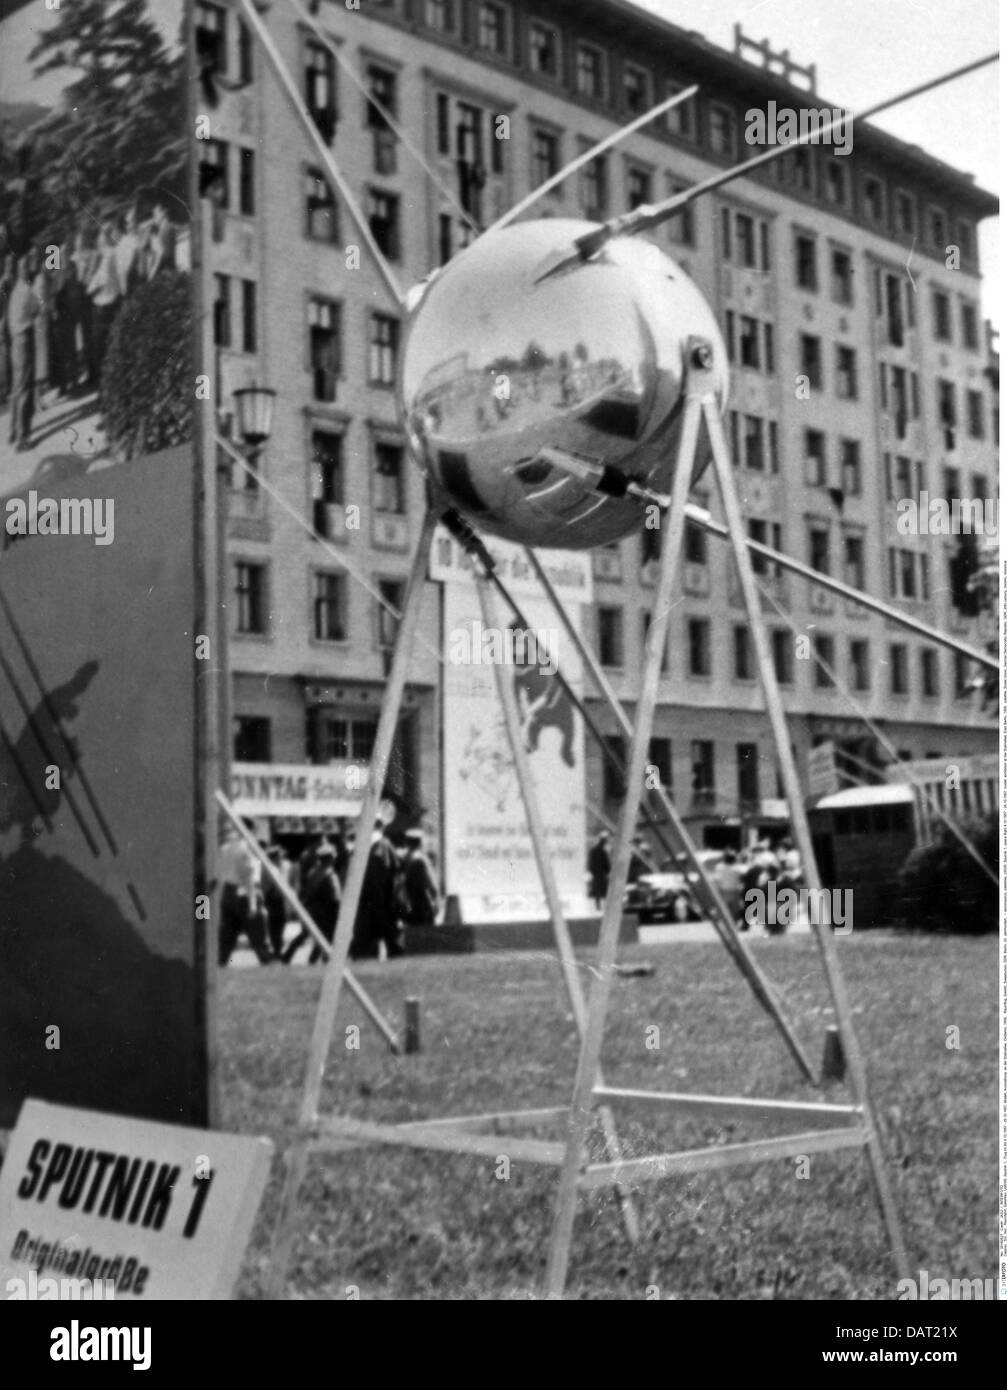 astronautics, satellites, USSR, Sputnik 1, space flight 4.10.1957 - 24.10.1957, reconstruction, exhibition at the Stalinallee, East Berlin, 1959, satellite, Soviet Union, German Democratic Republic, GDR, 20th century, historic, historical, exhibit, exhibits, 1950s, people, Additional-Rights-Clearences-Not Available Stock Photo